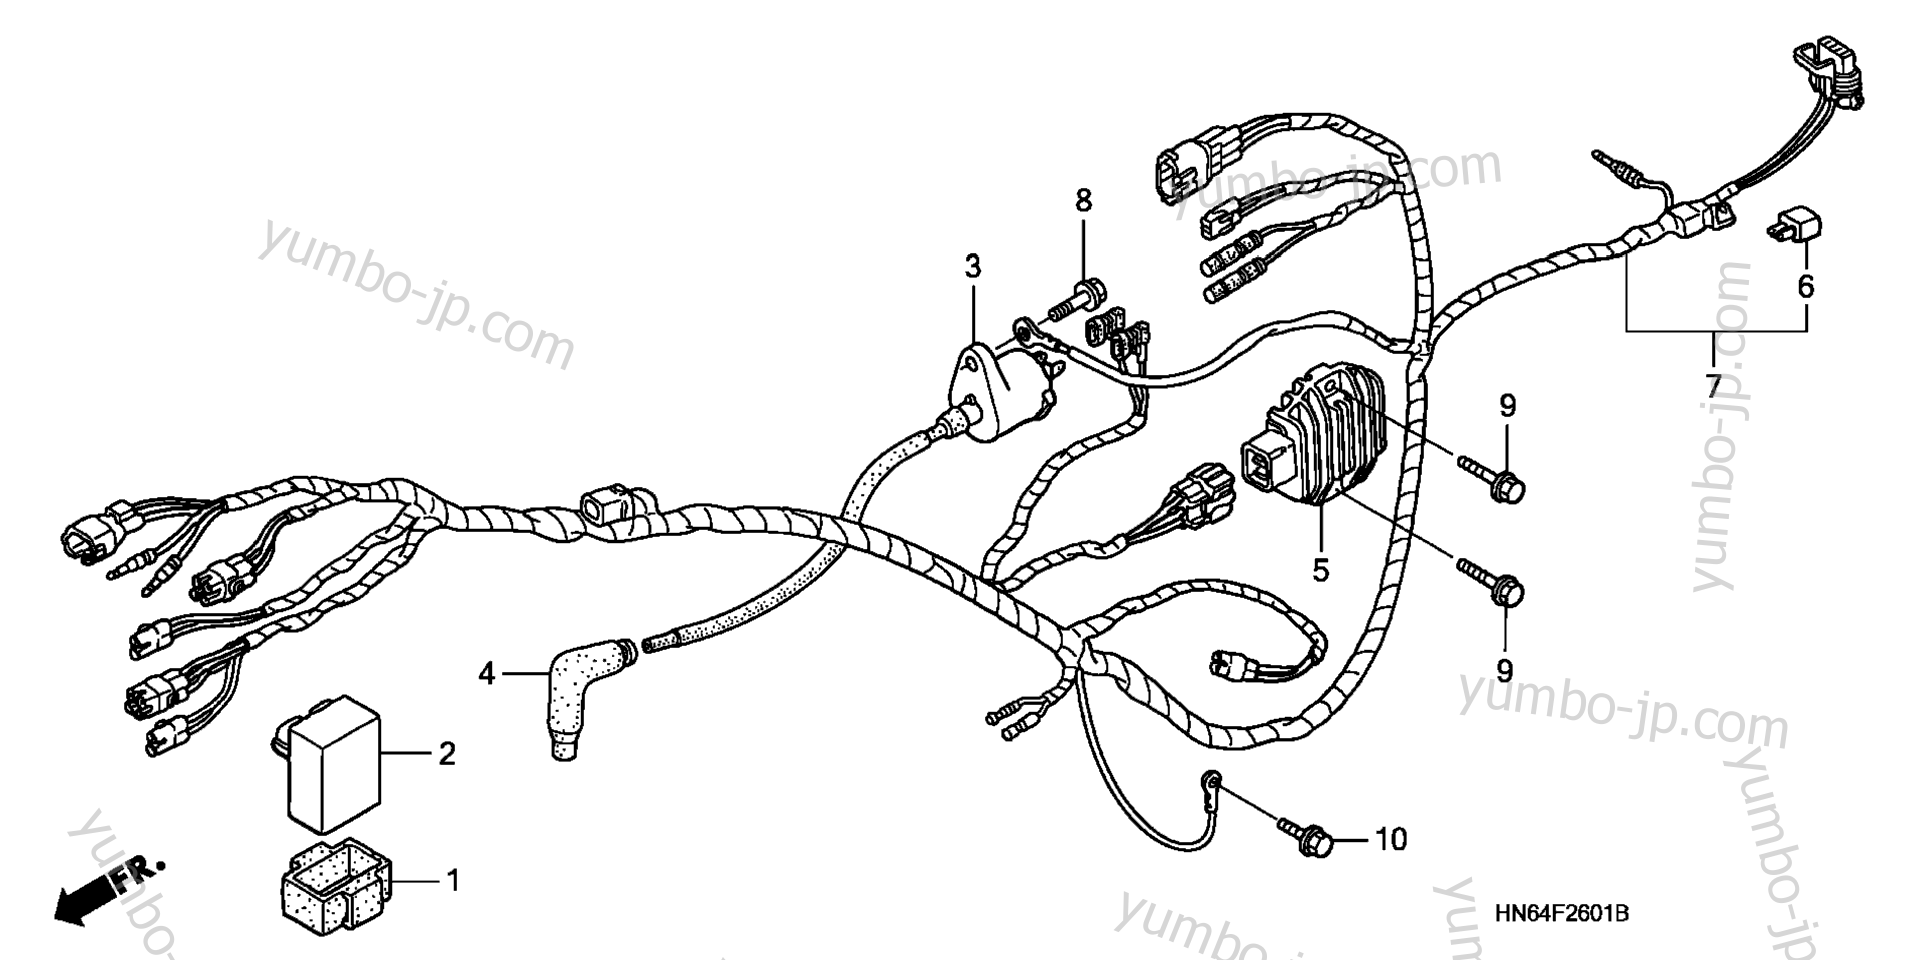 WIRE HARNESS ('06-'07) for ATVs HONDA TRX250EX A 2007 year